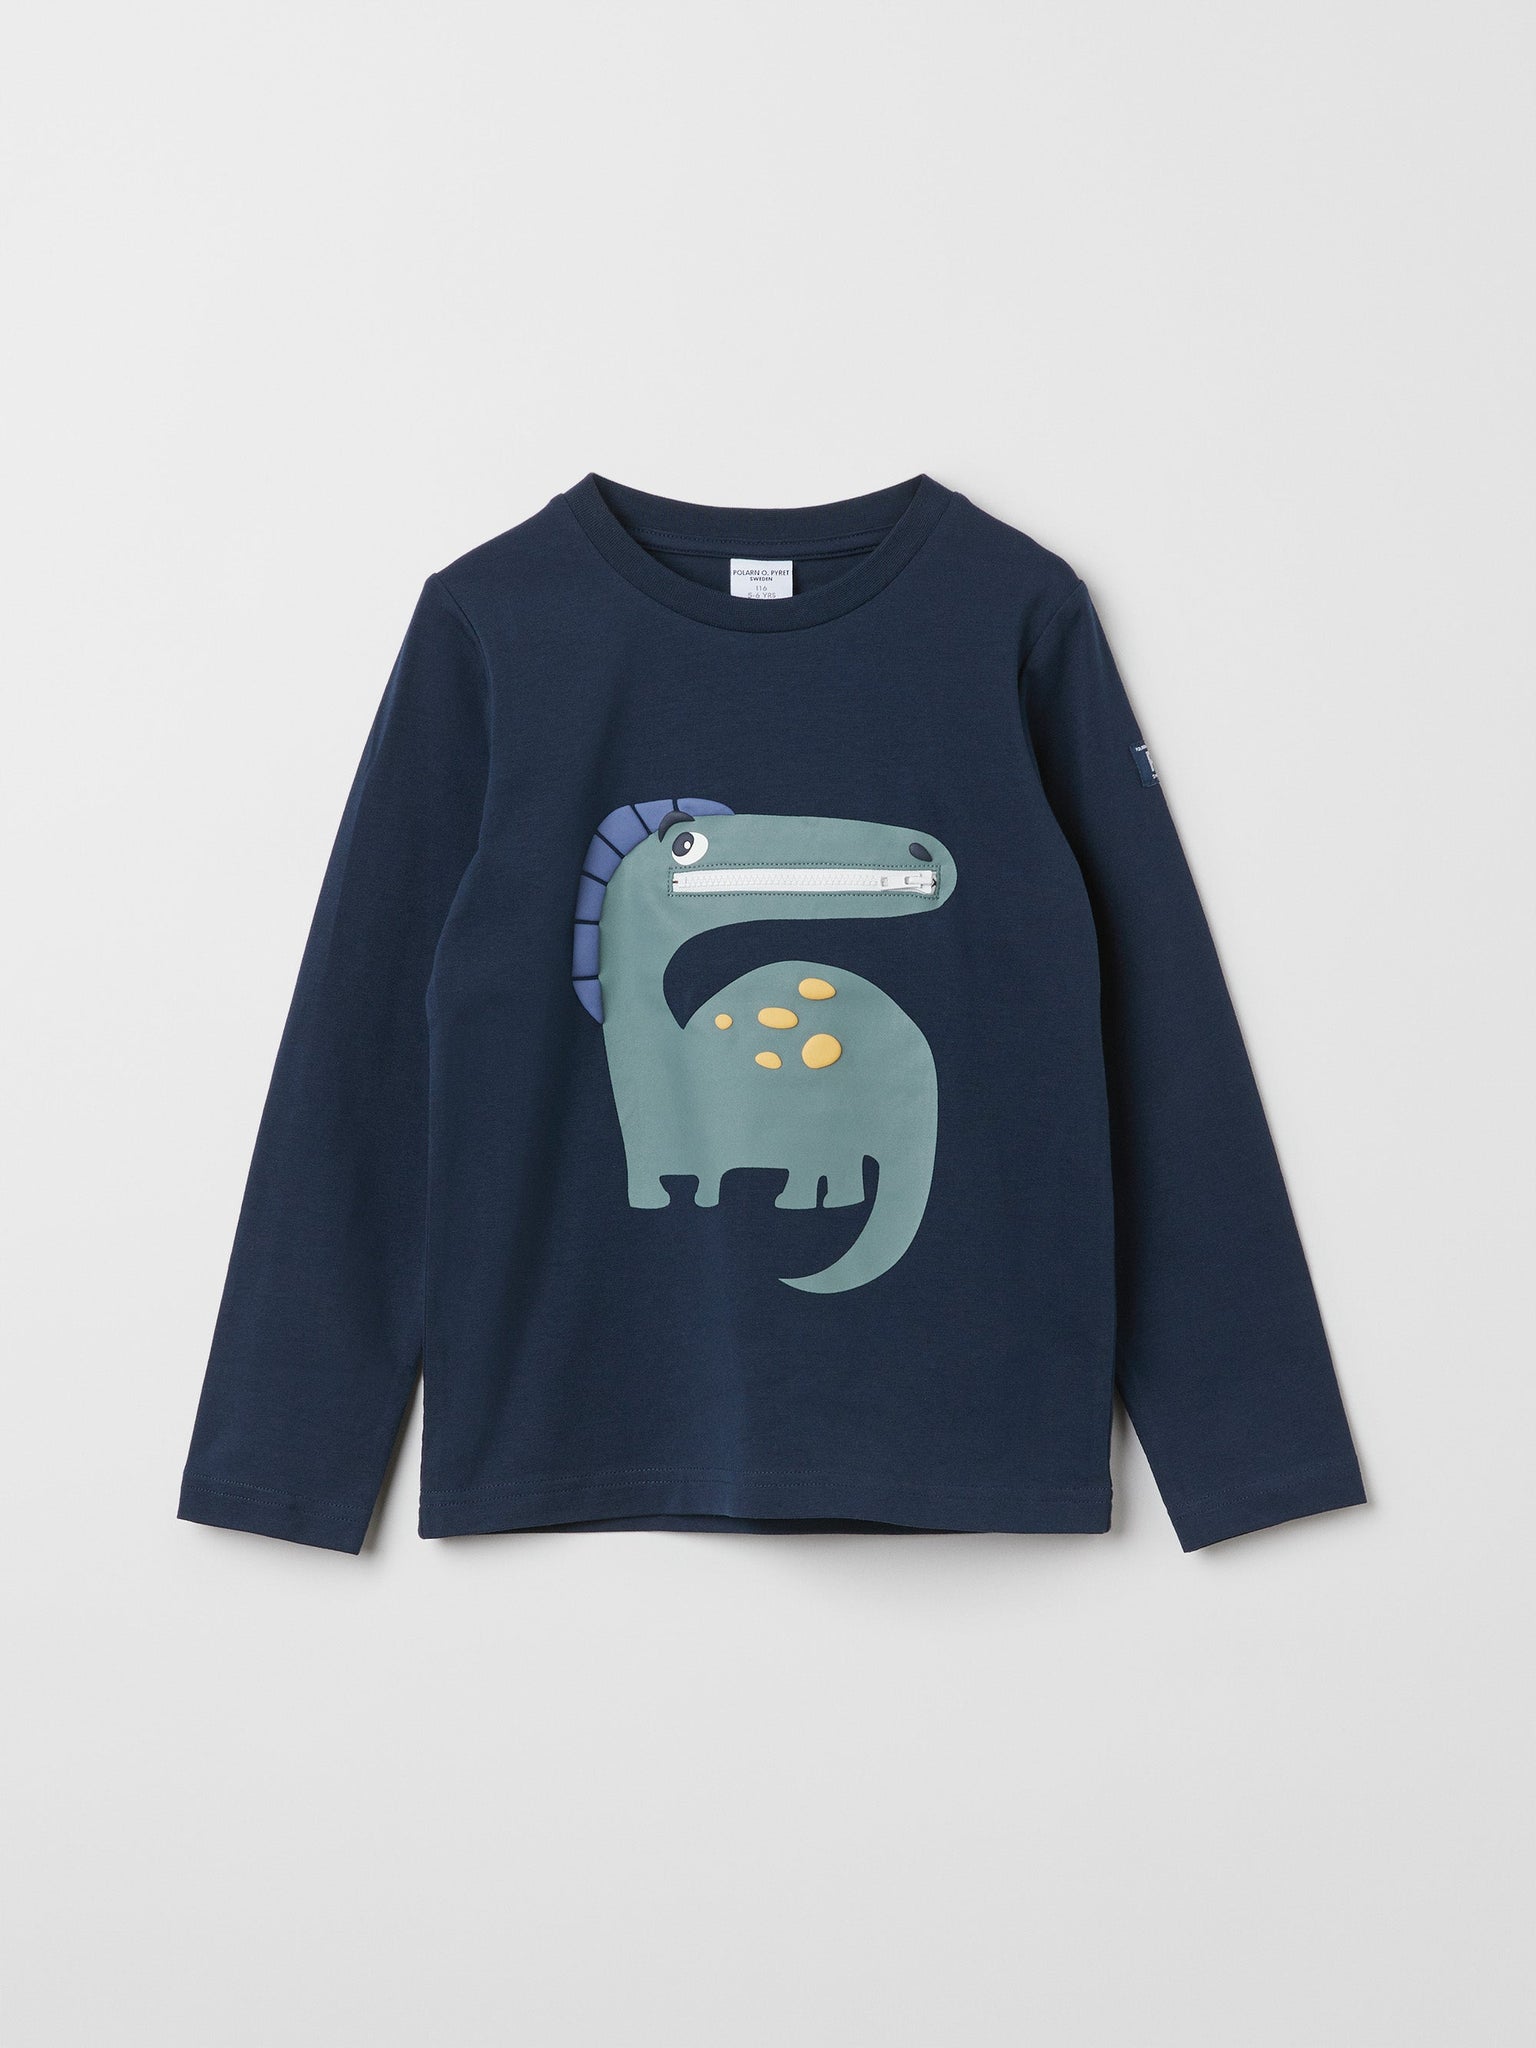 Navy Dinosaur Print Kids Top from the Polarn O. Pyret kidswear collection. Nordic kids clothes made from sustainable sources.